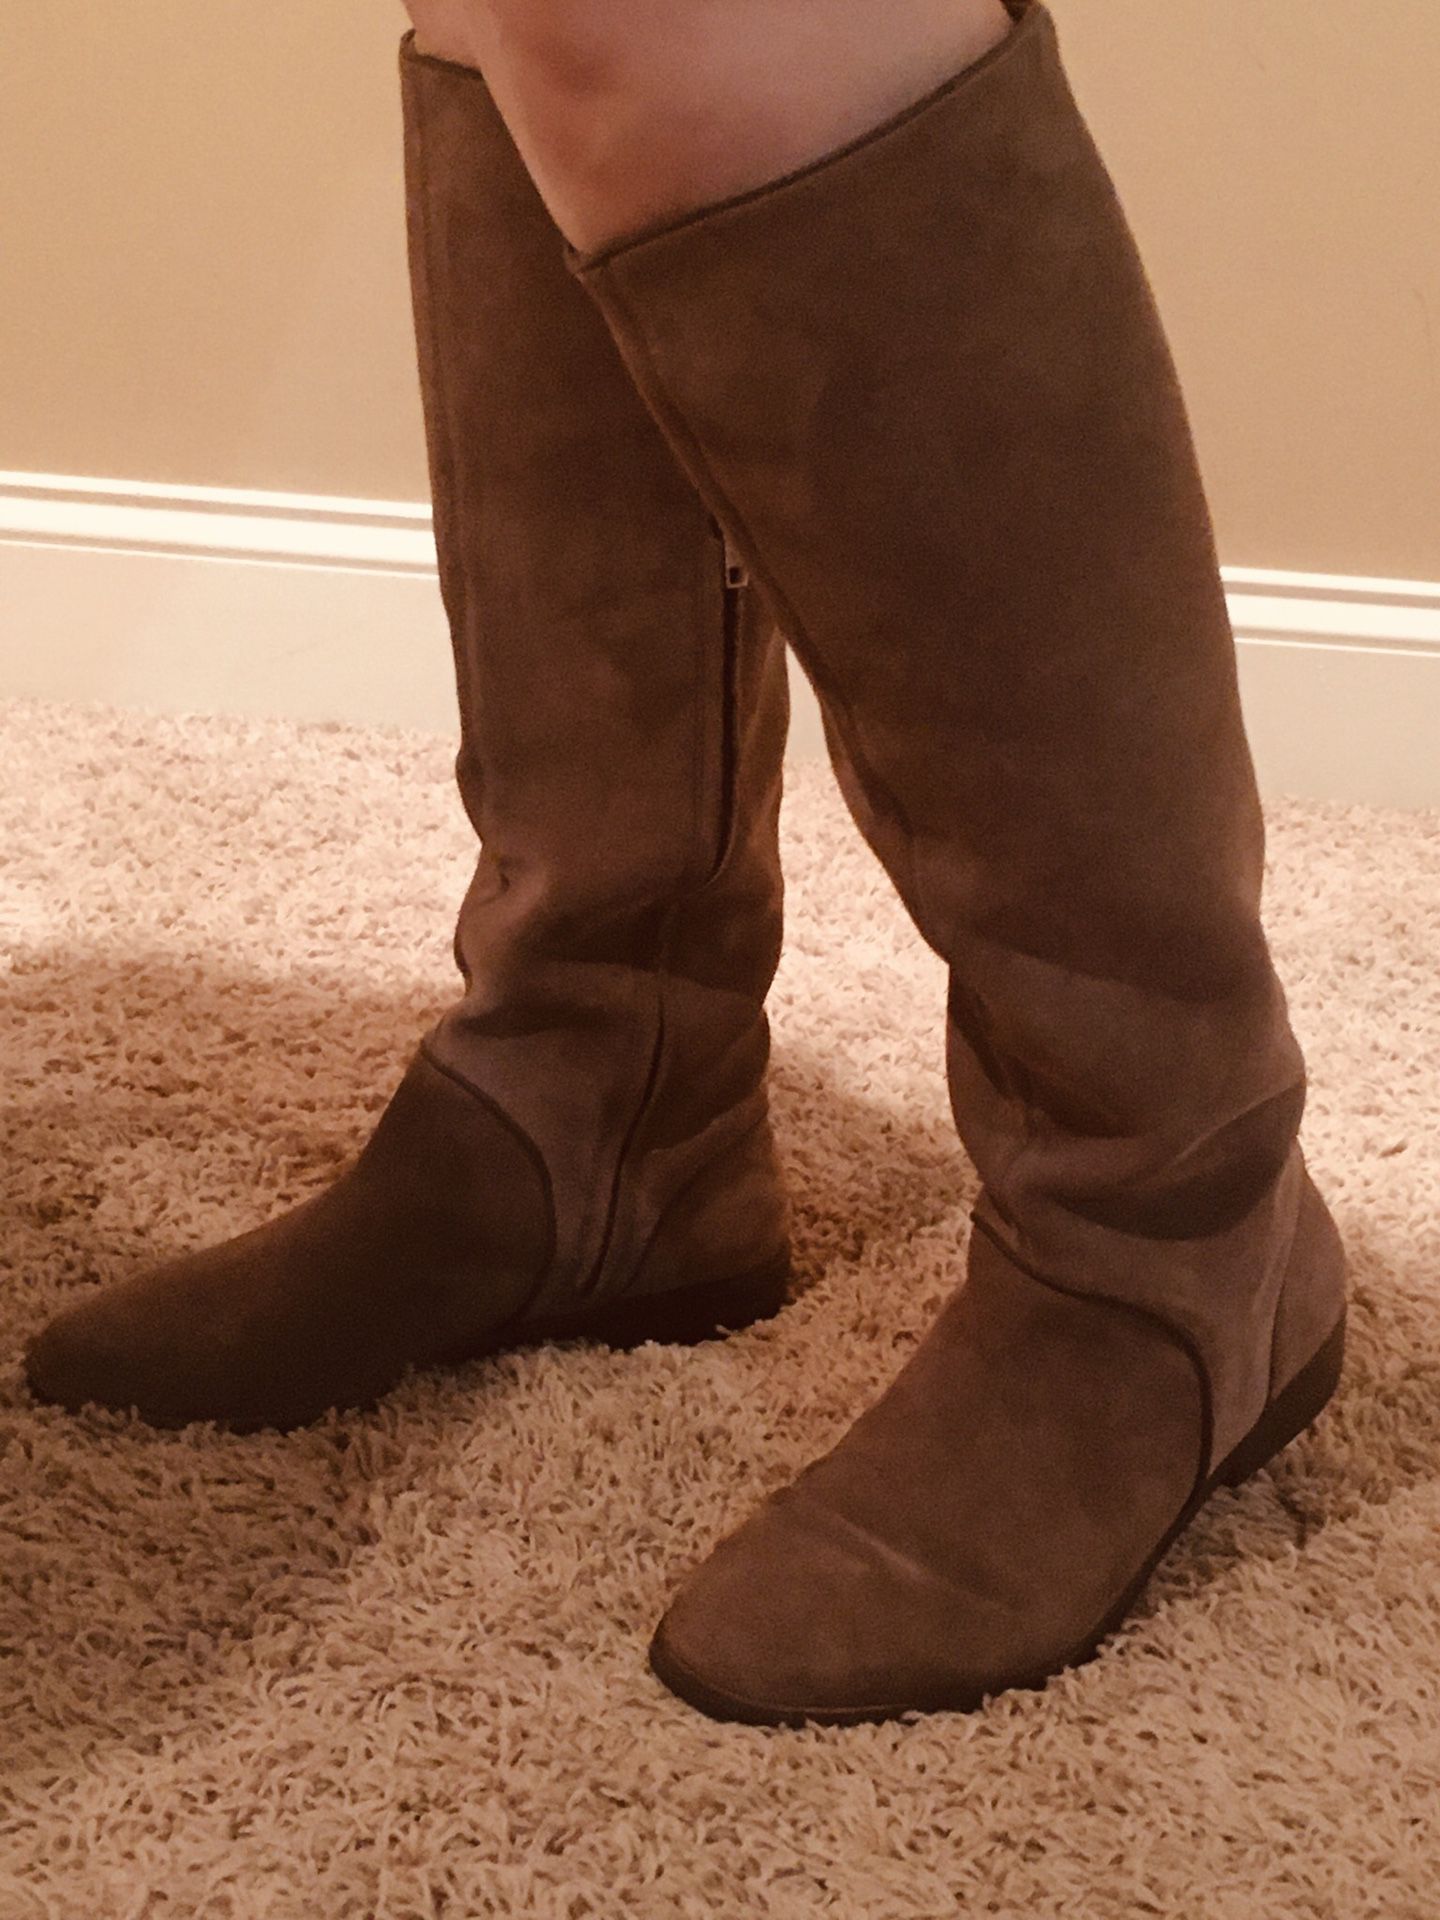 UGG Suede Knee Boots size 9.5